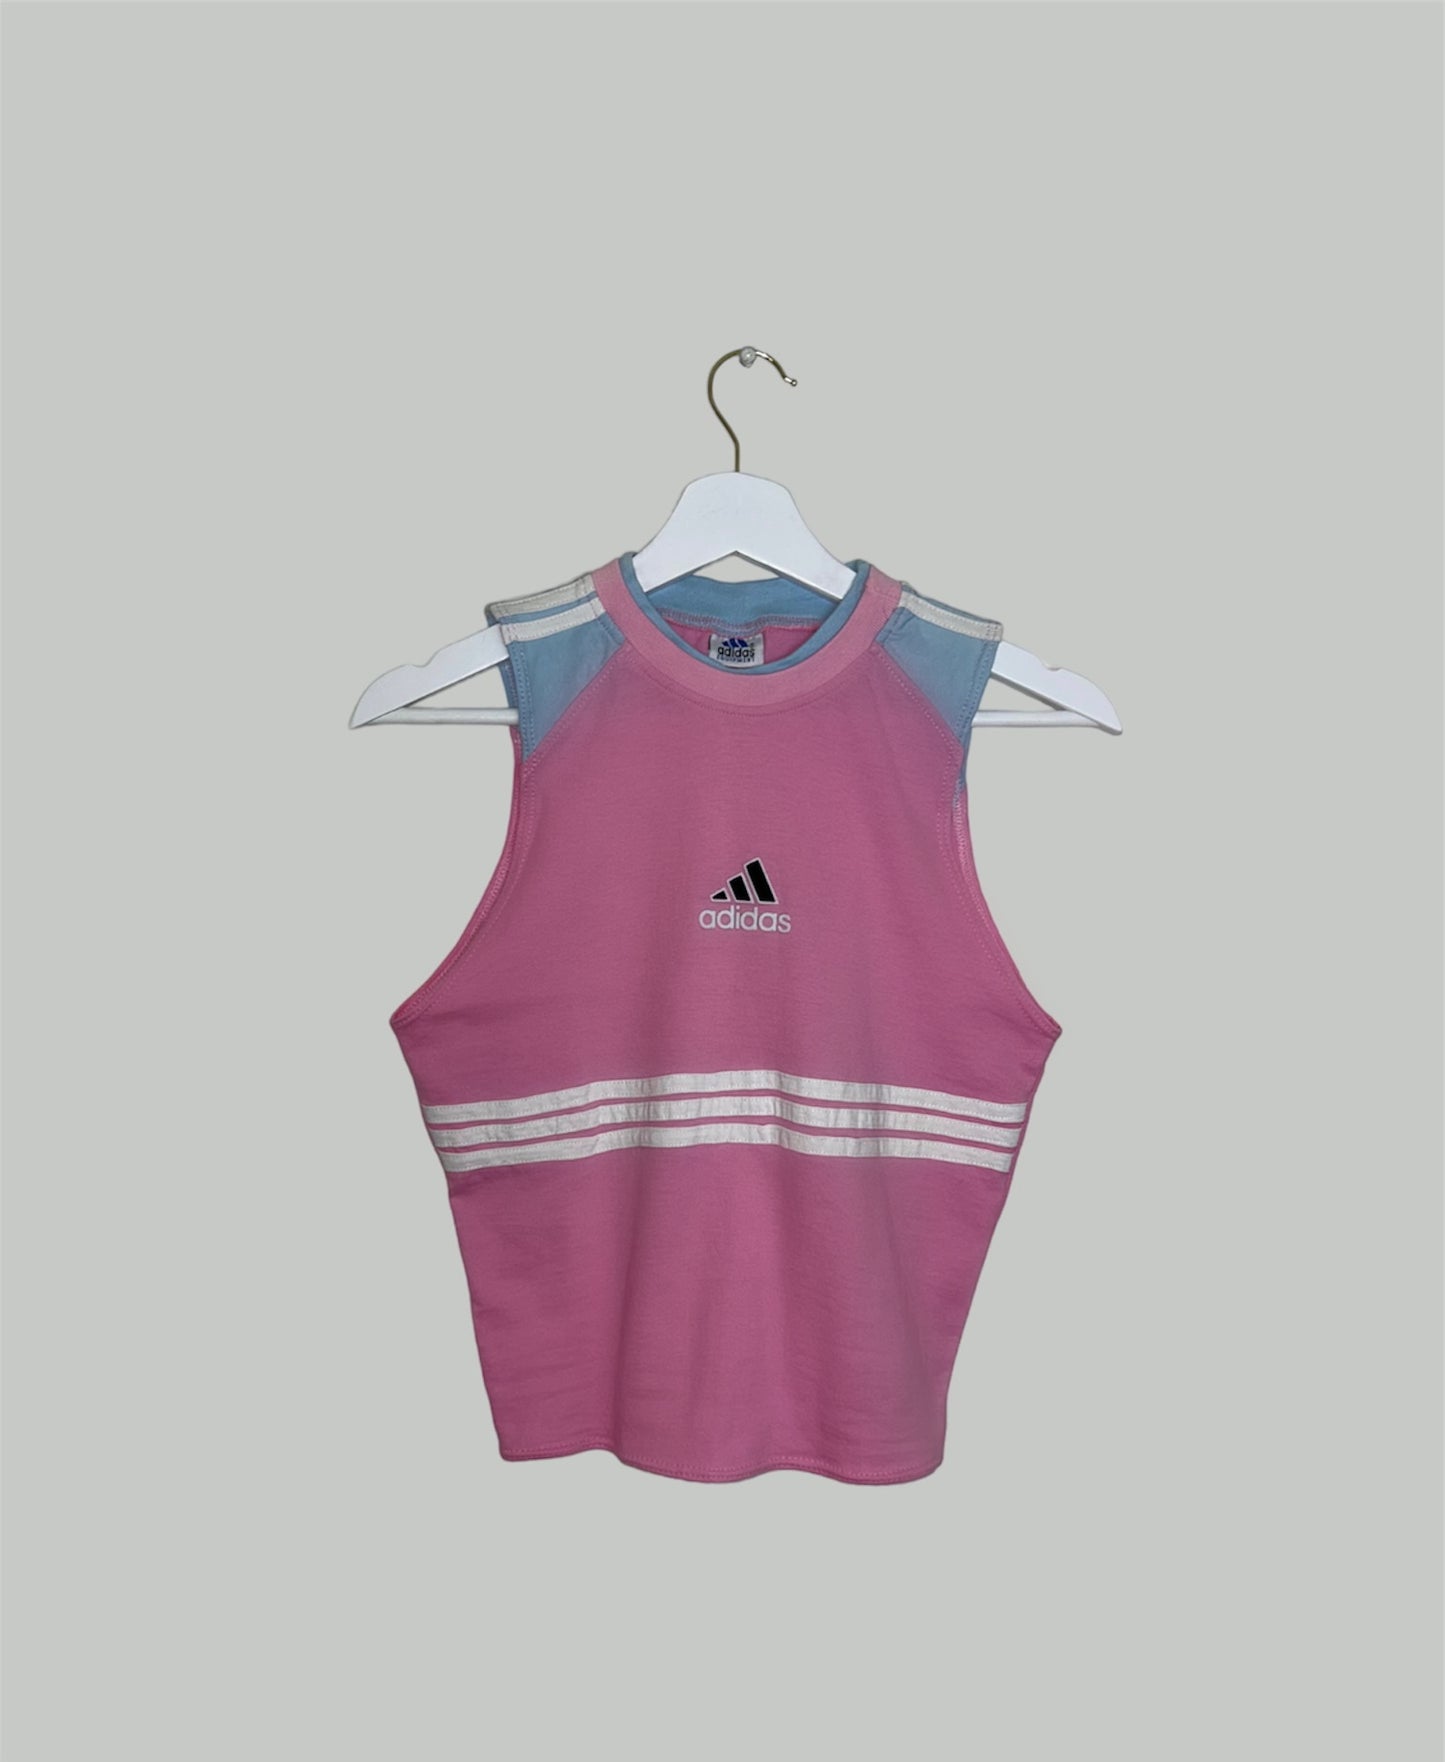 pink sleeveless crop top with black and white adidas logo